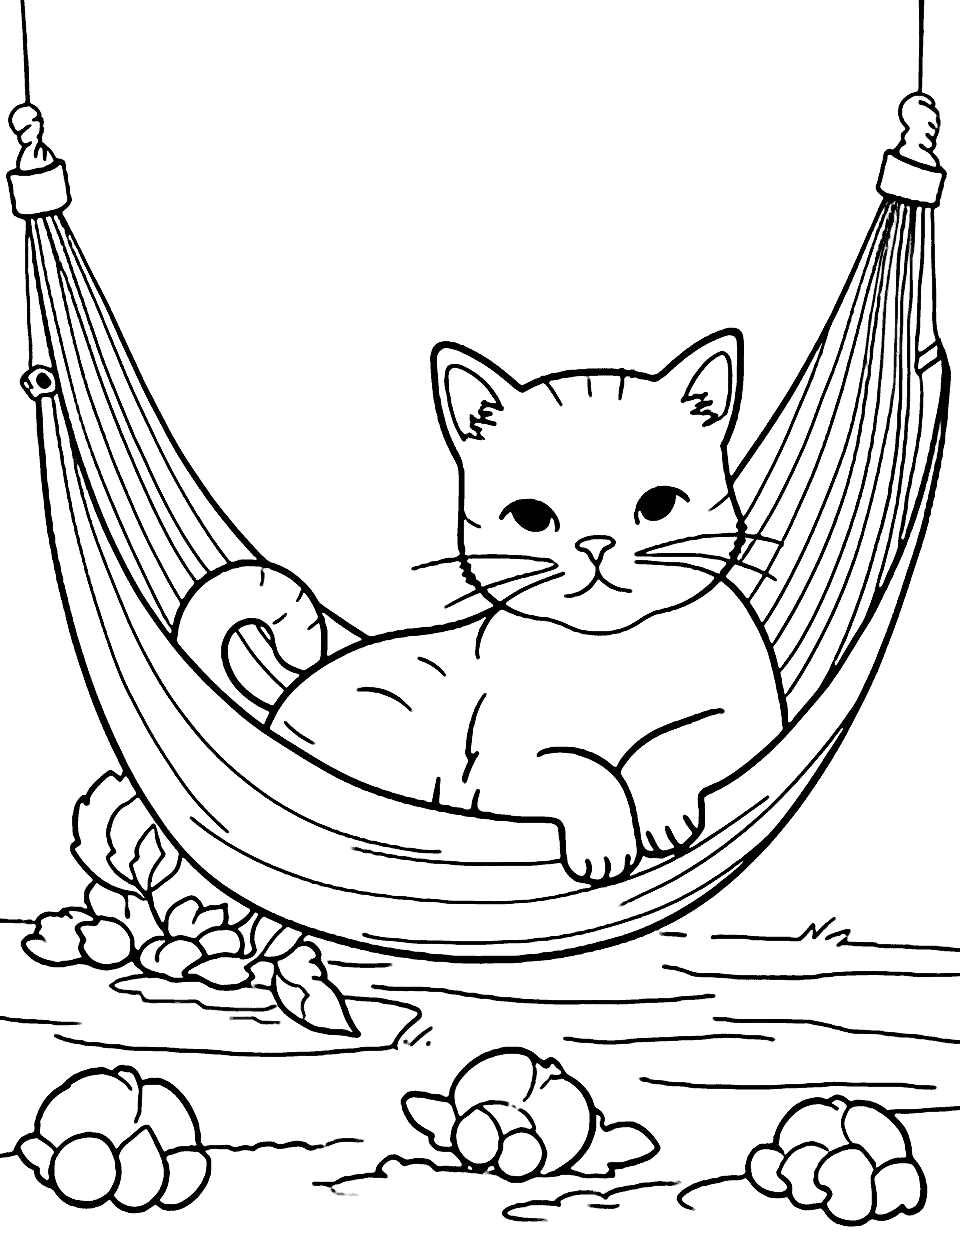 Cat in a Summer Hammock Coloring Page - A cat lazily swaying in a hammock on a warm summer day.